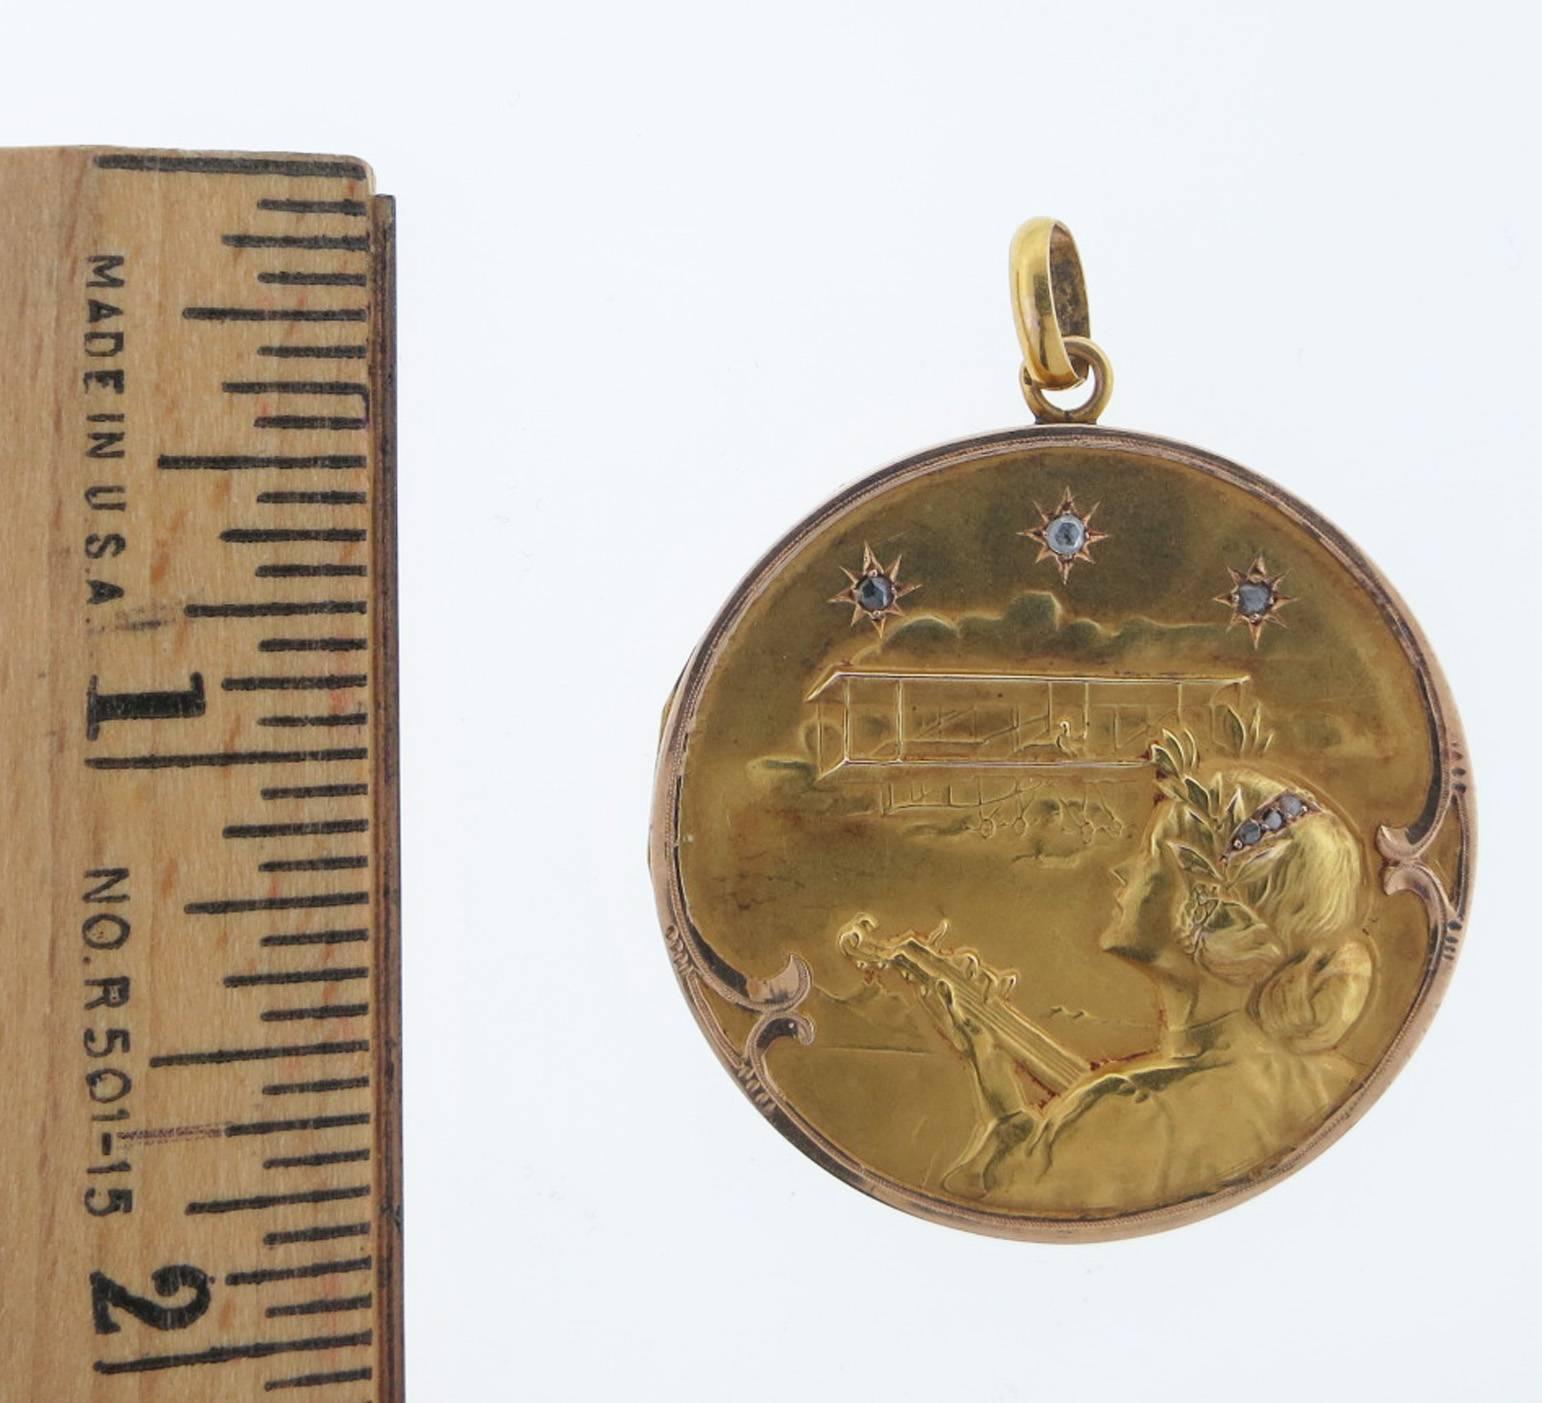 Women's  Rare Antique French Gold Locket Depicting the Wright Brothers Arrival In Paris 